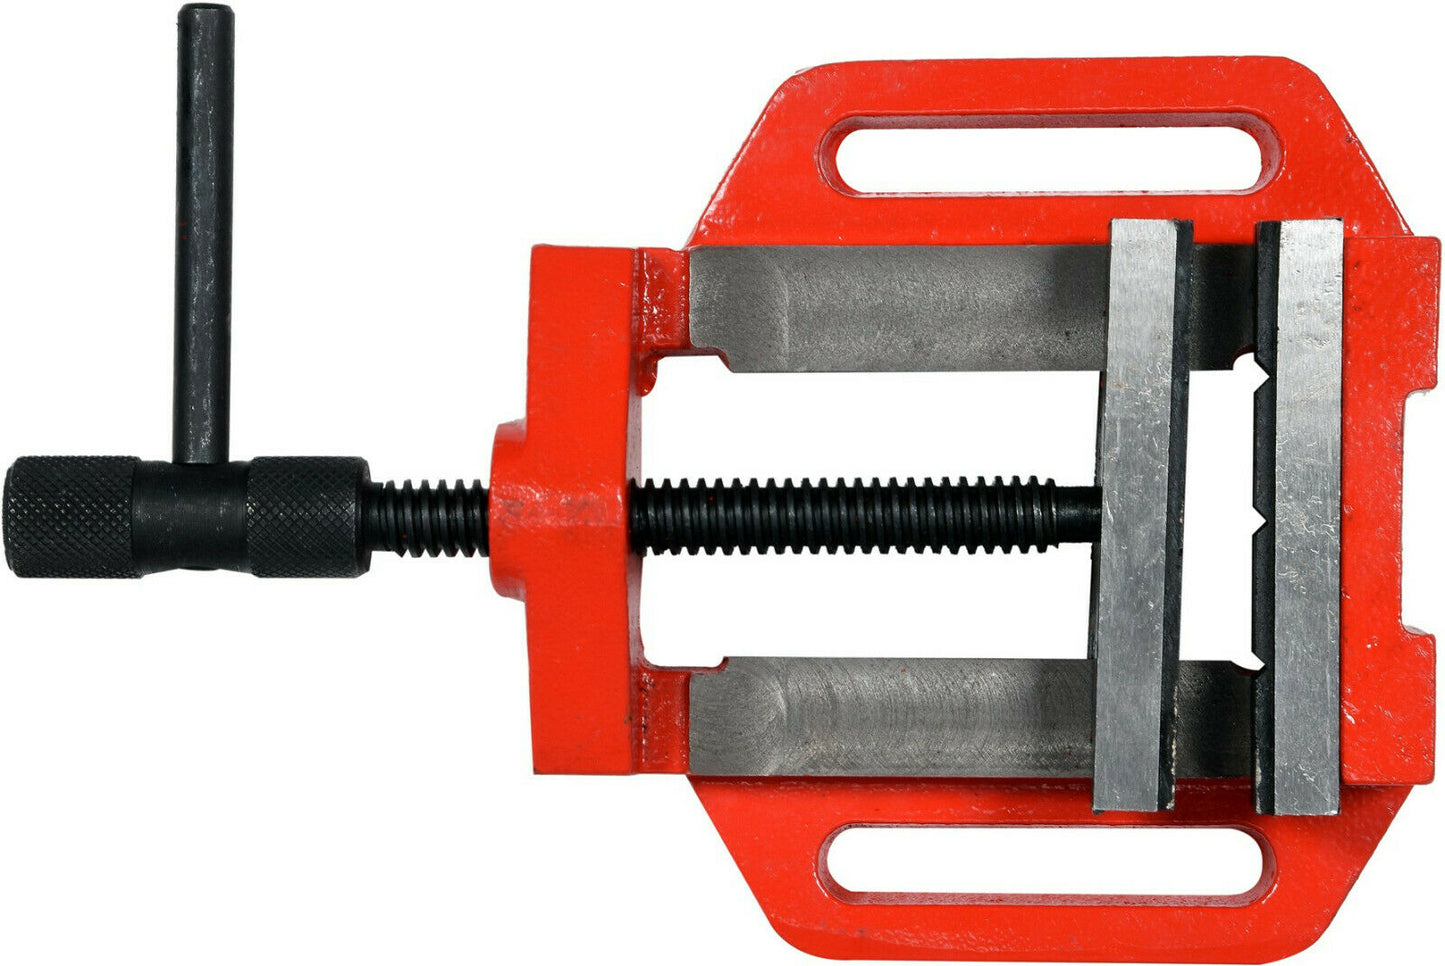 Yato YT-65072 Machinery vice 100mm vice workshop screw clamp